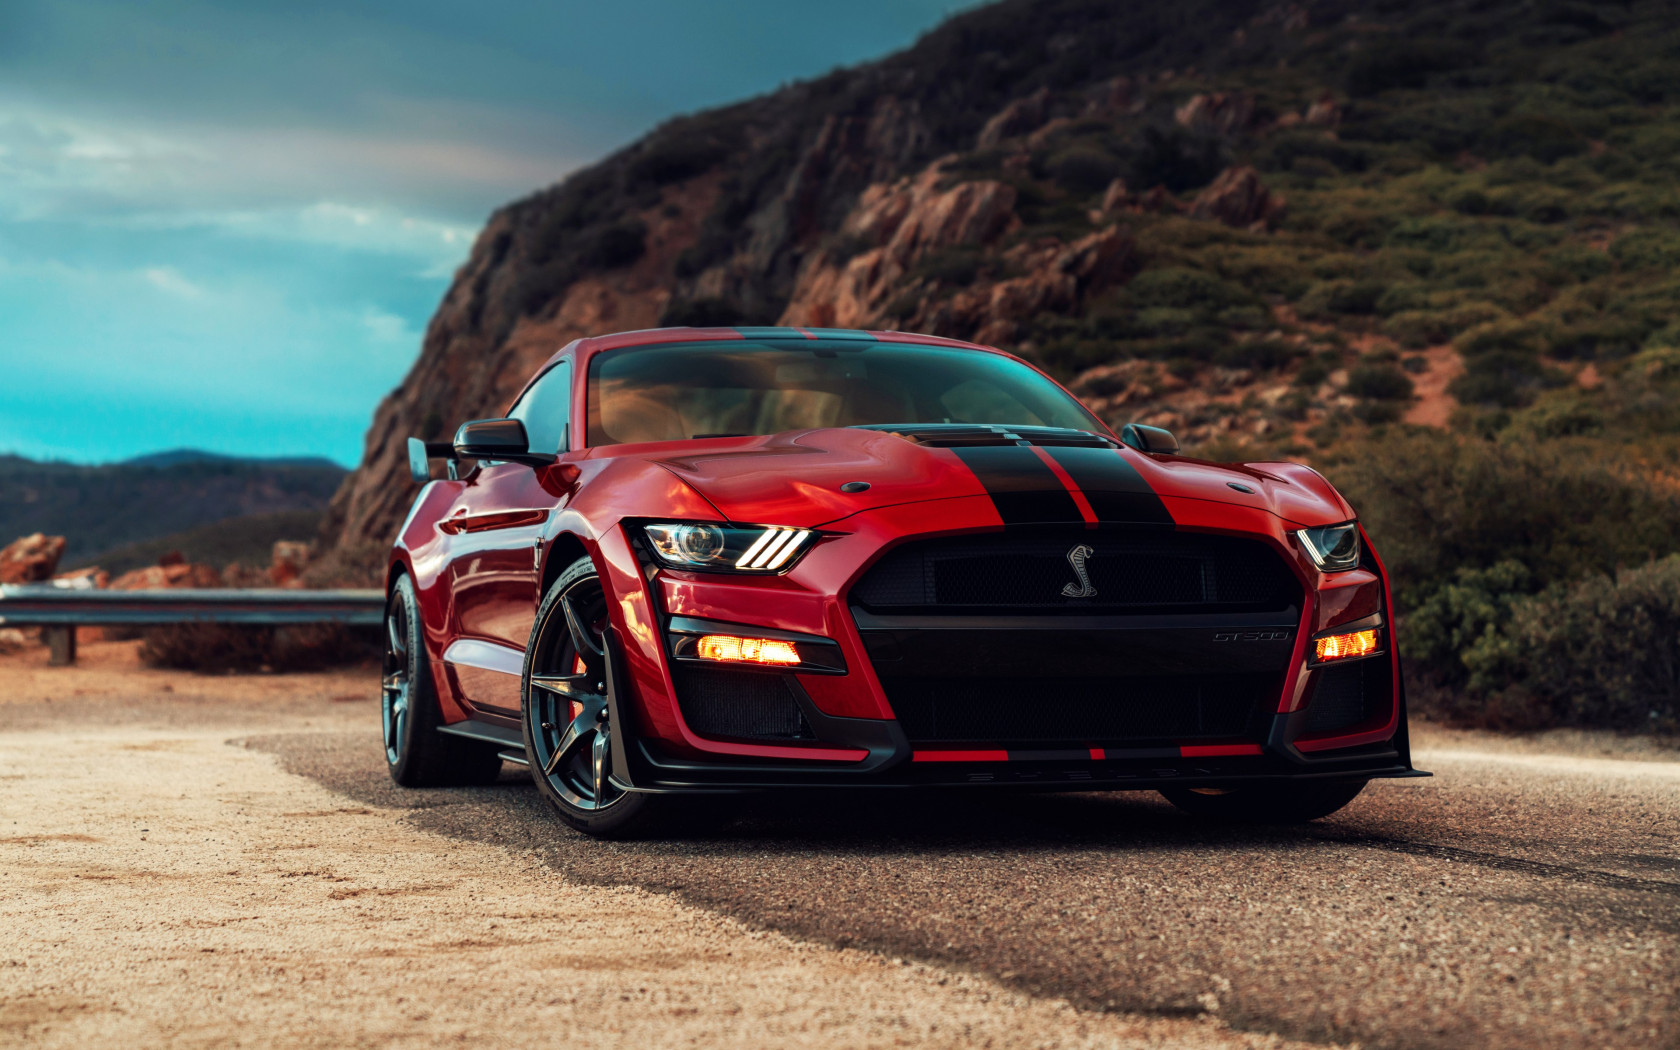 Ford Mustang Shelby GT500 wallpaper 1680x1050